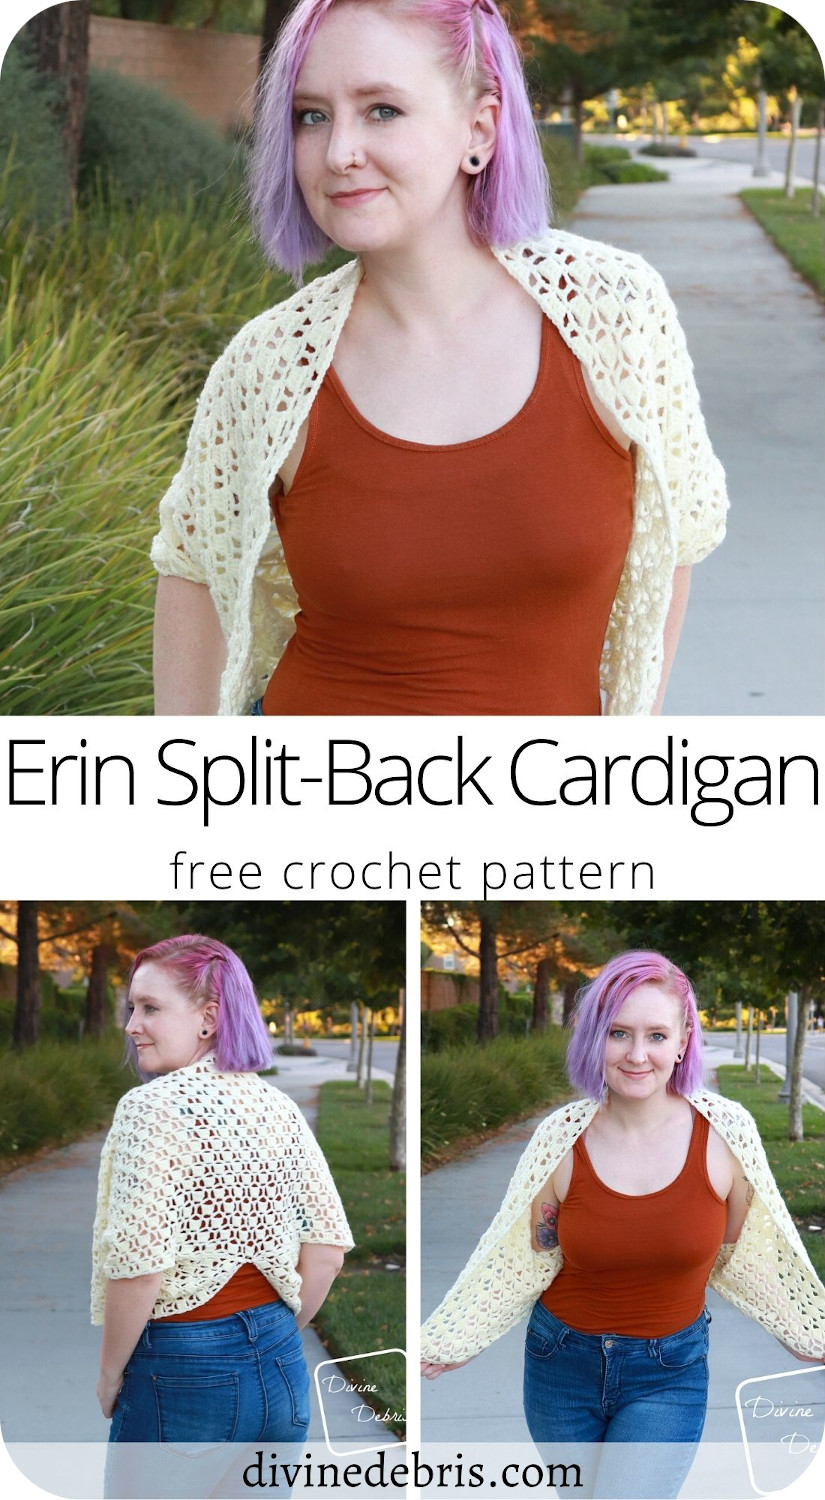 Learn to make the interesting and fun Erin Split-Back Cardigan, available in sizes X2 - 5X, from a free crochet pattern by DivineDebris.com